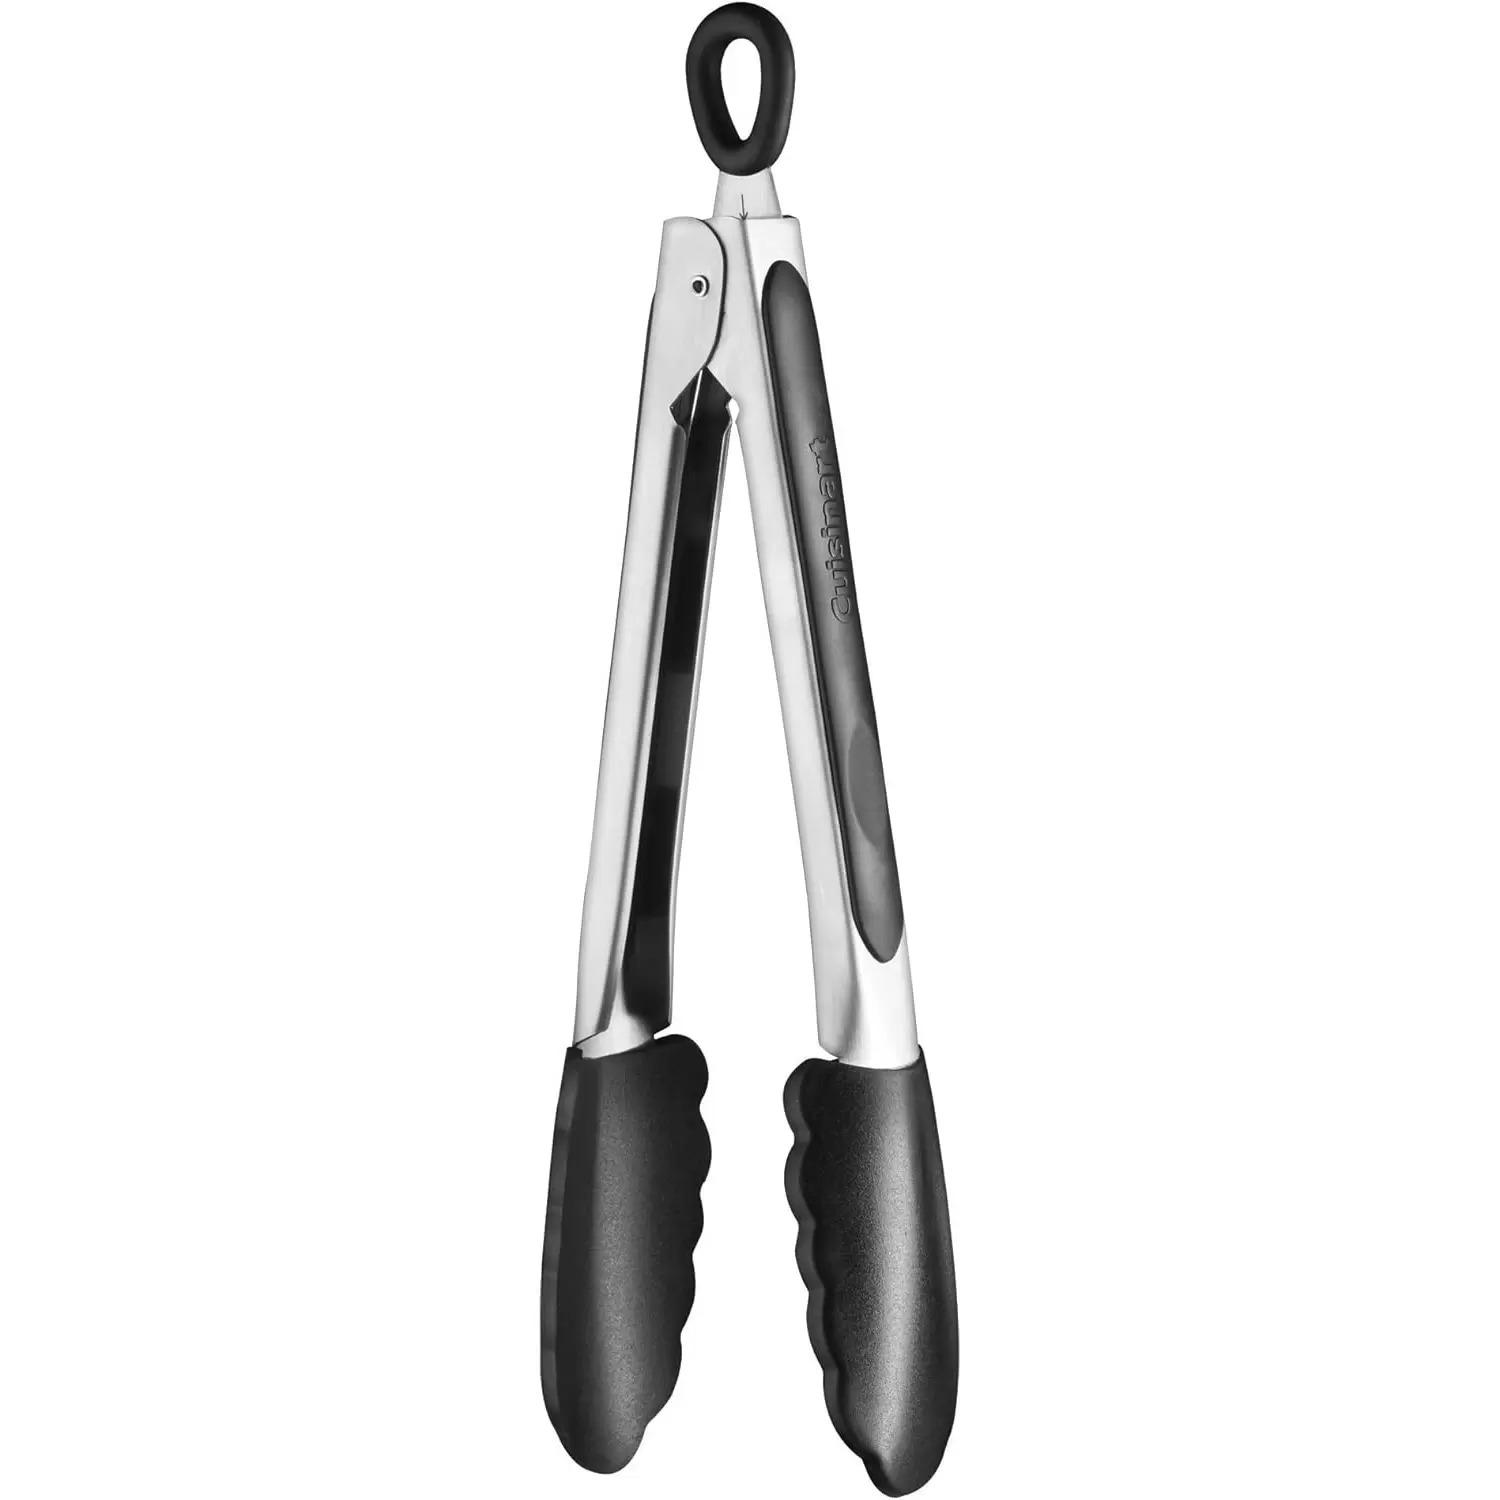 Cuisinart Stainless Steel Silicone-Tipped Kitchen Tongs for $5.09